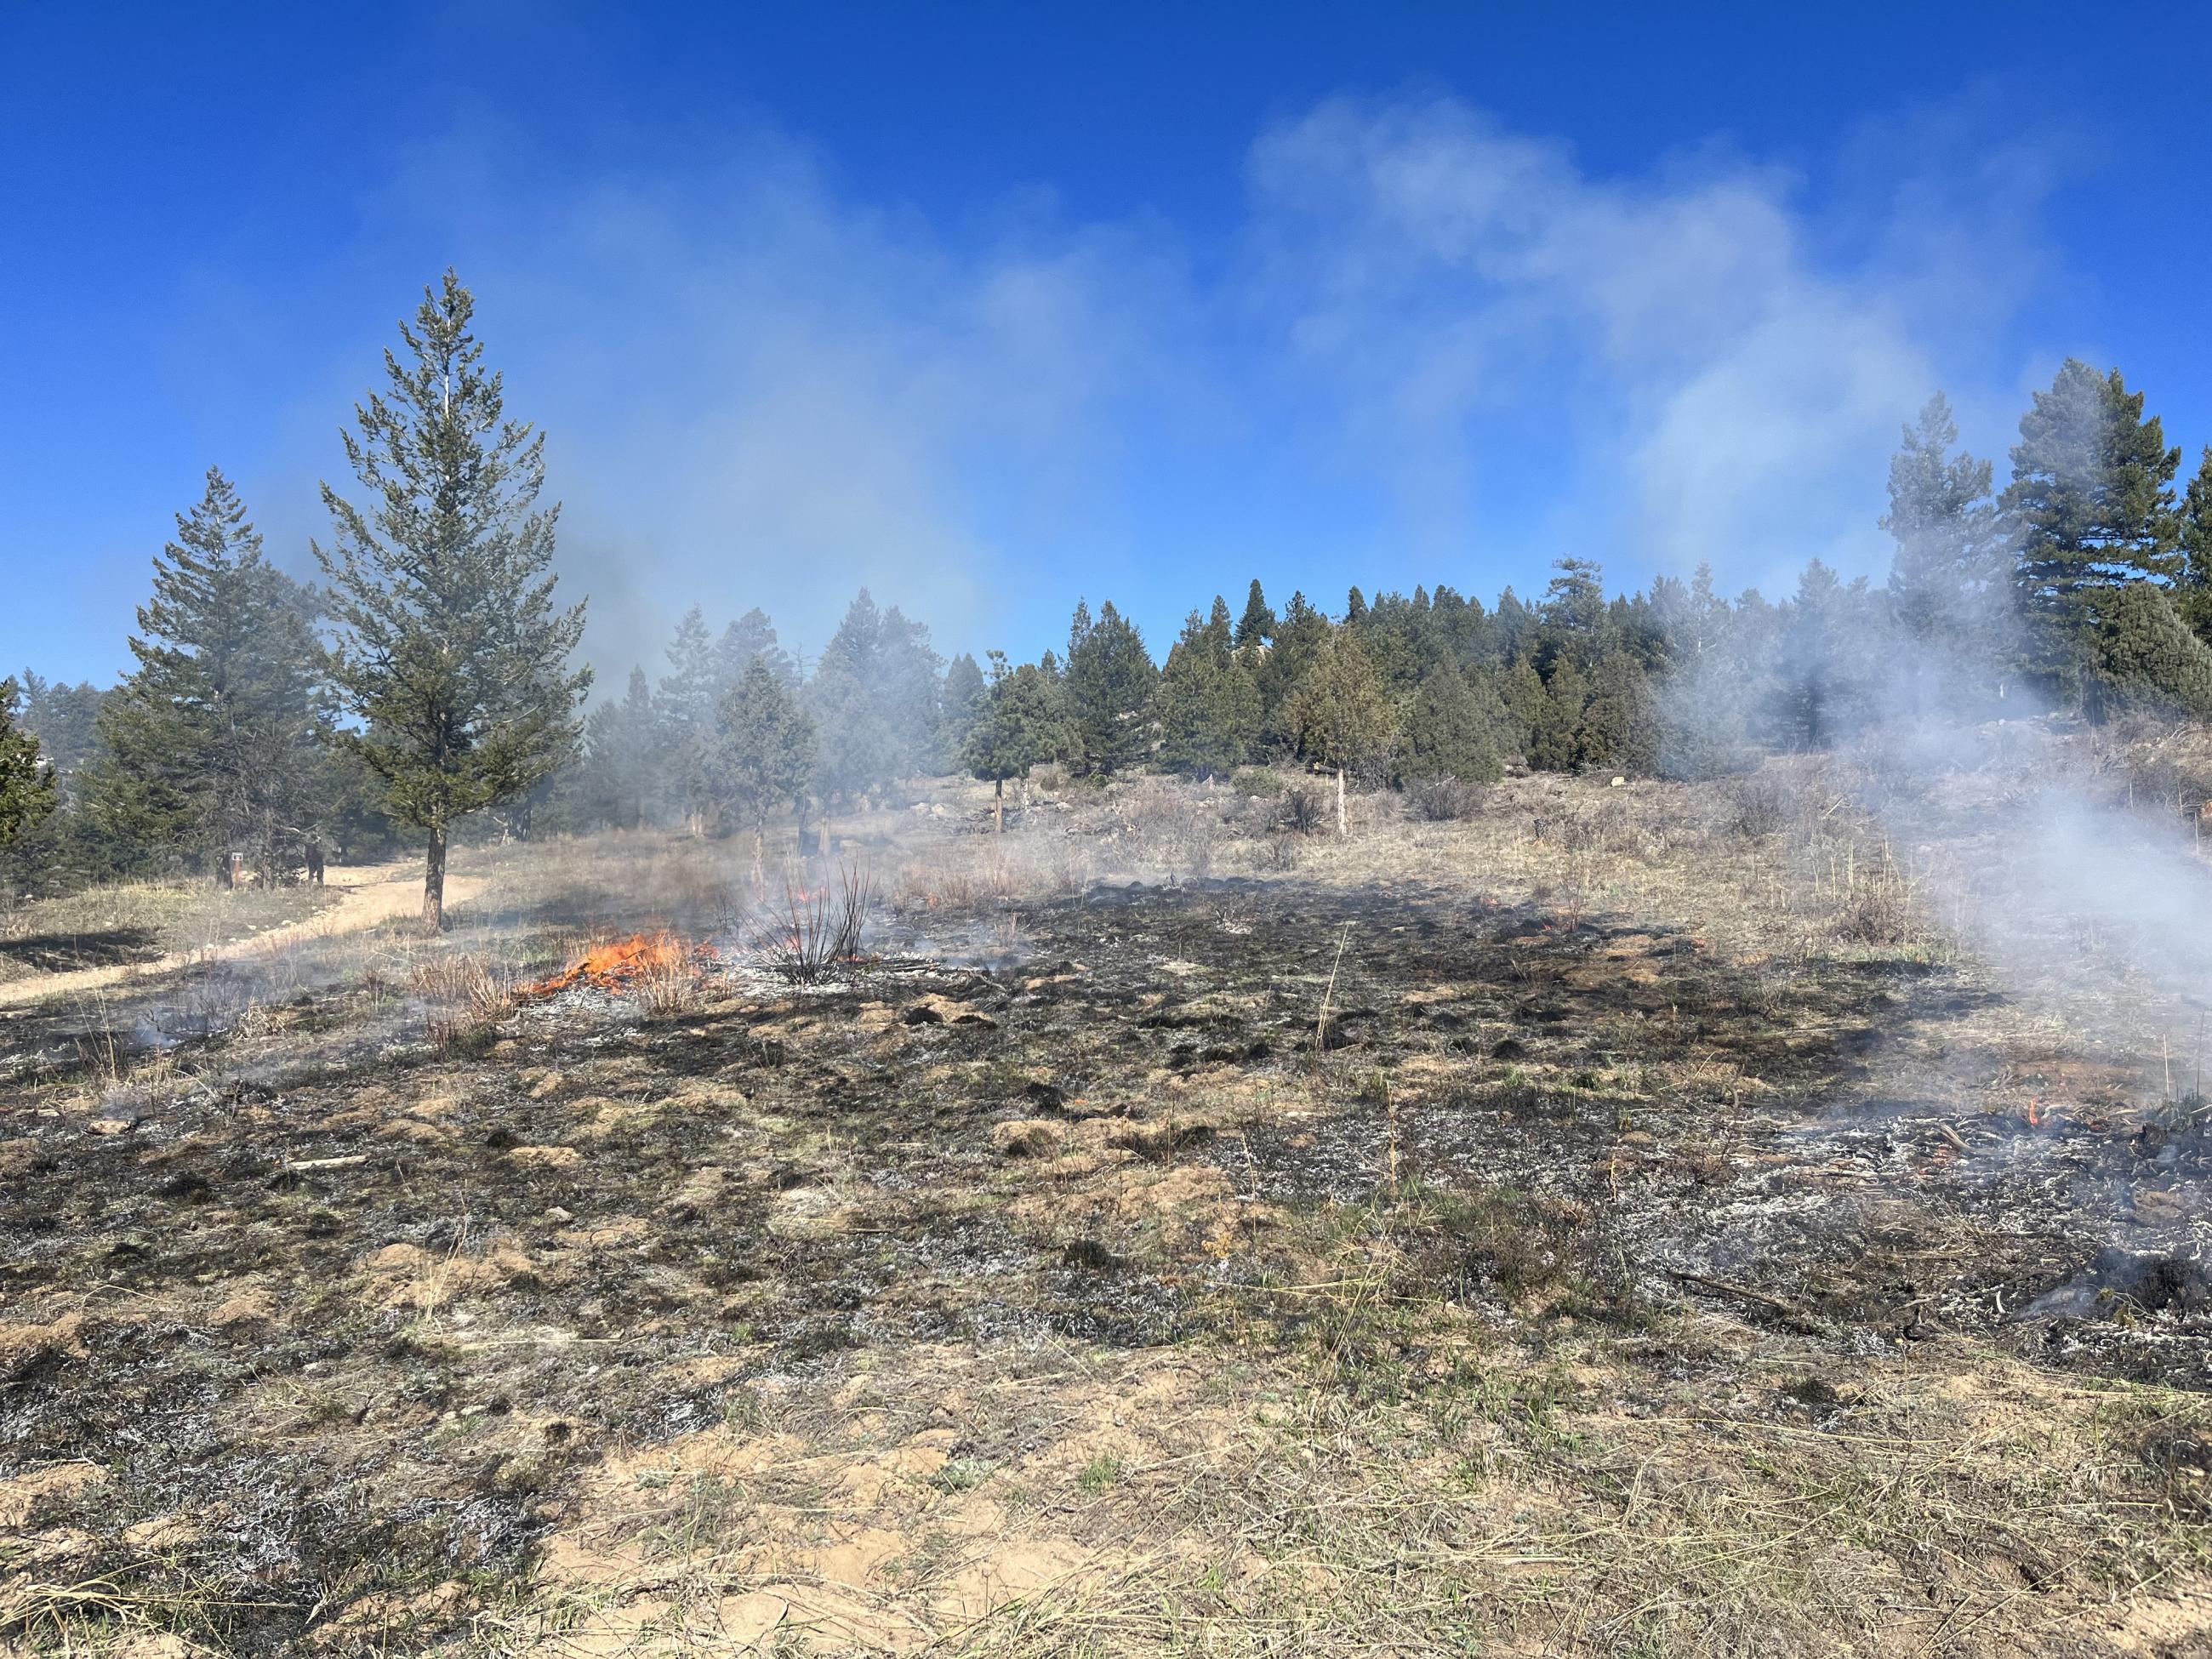 A small test fire nears completion on a hill for the Forsythe II prescribed burn. 